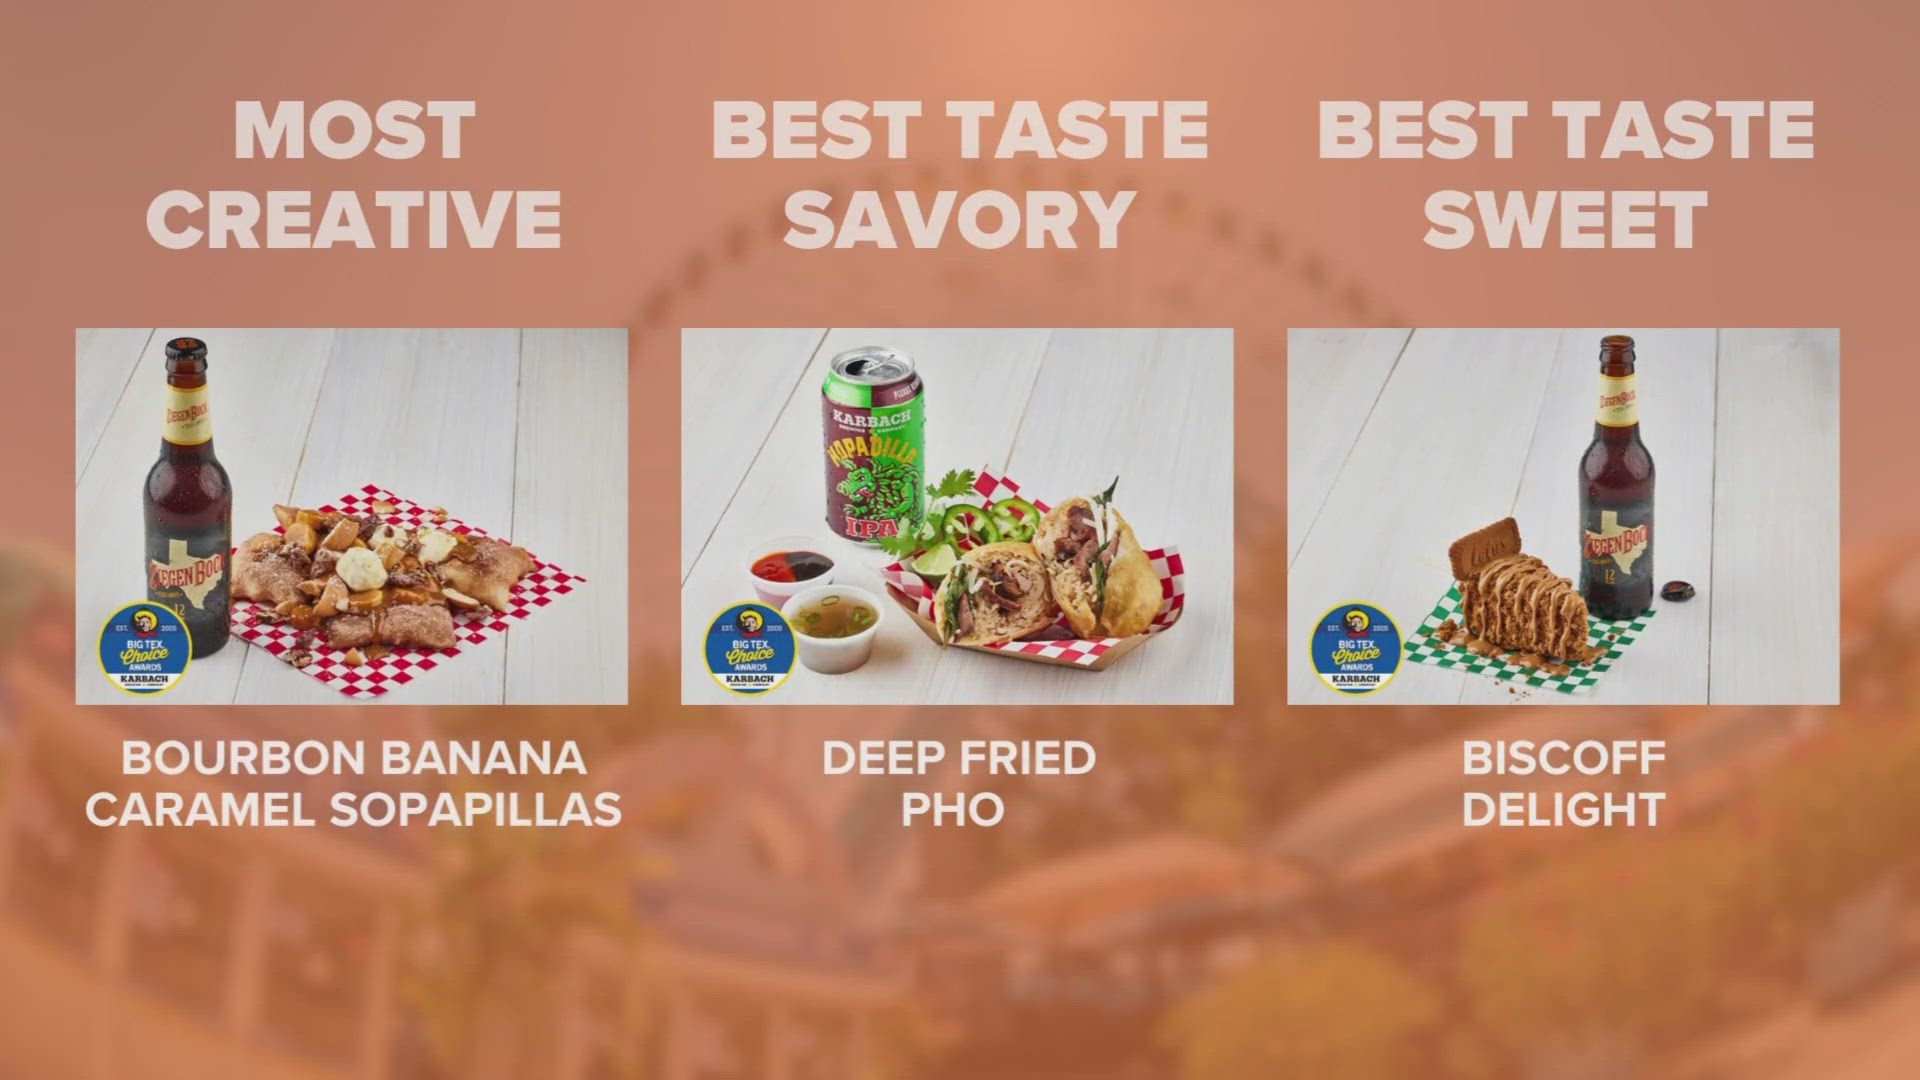 The awards were for most creative new food, most taste - savory, and most taste - sweet.